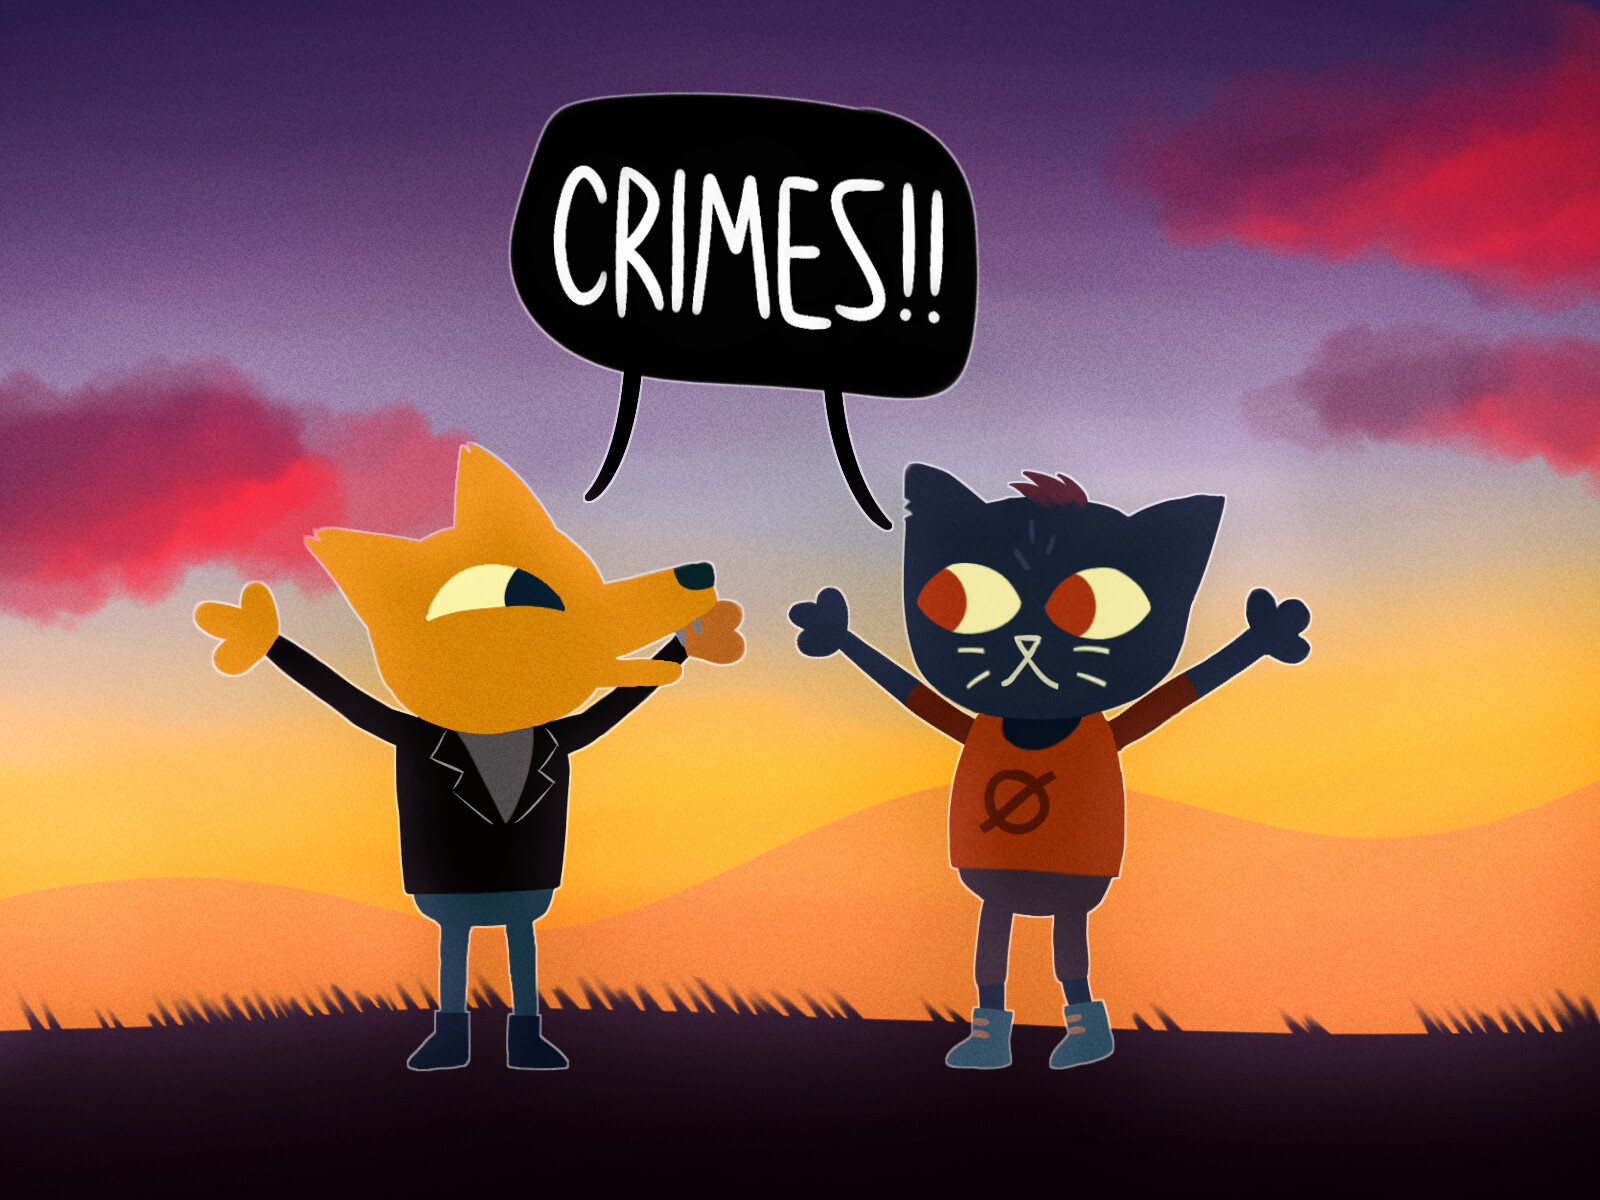 Gregg night in the woods